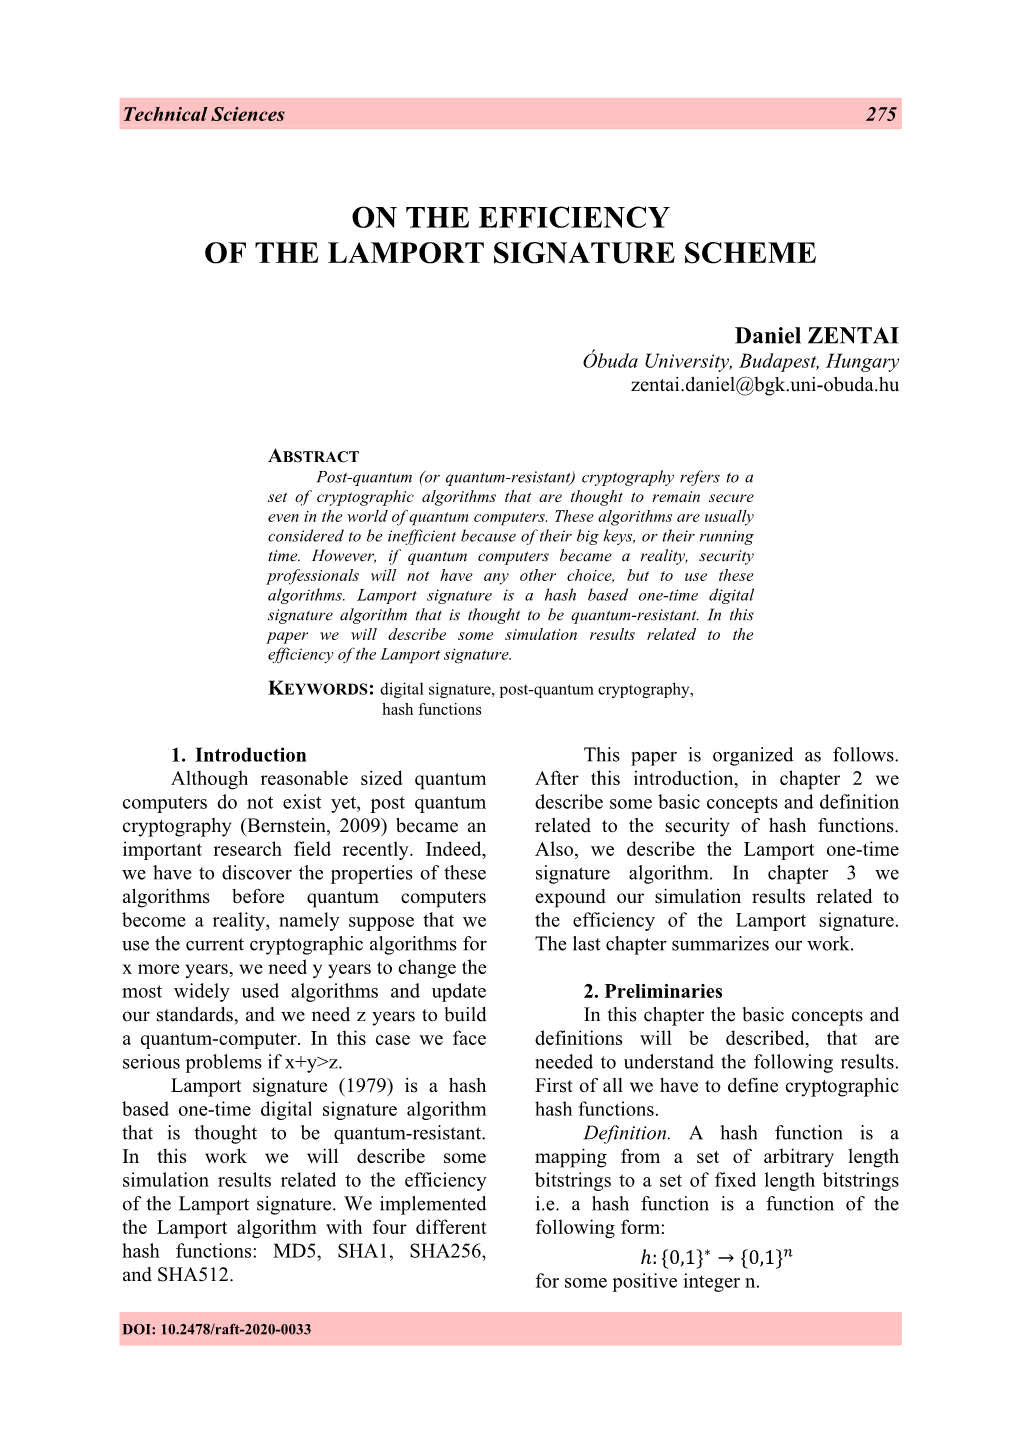 On the Efficiency of the Lamport Signature Scheme